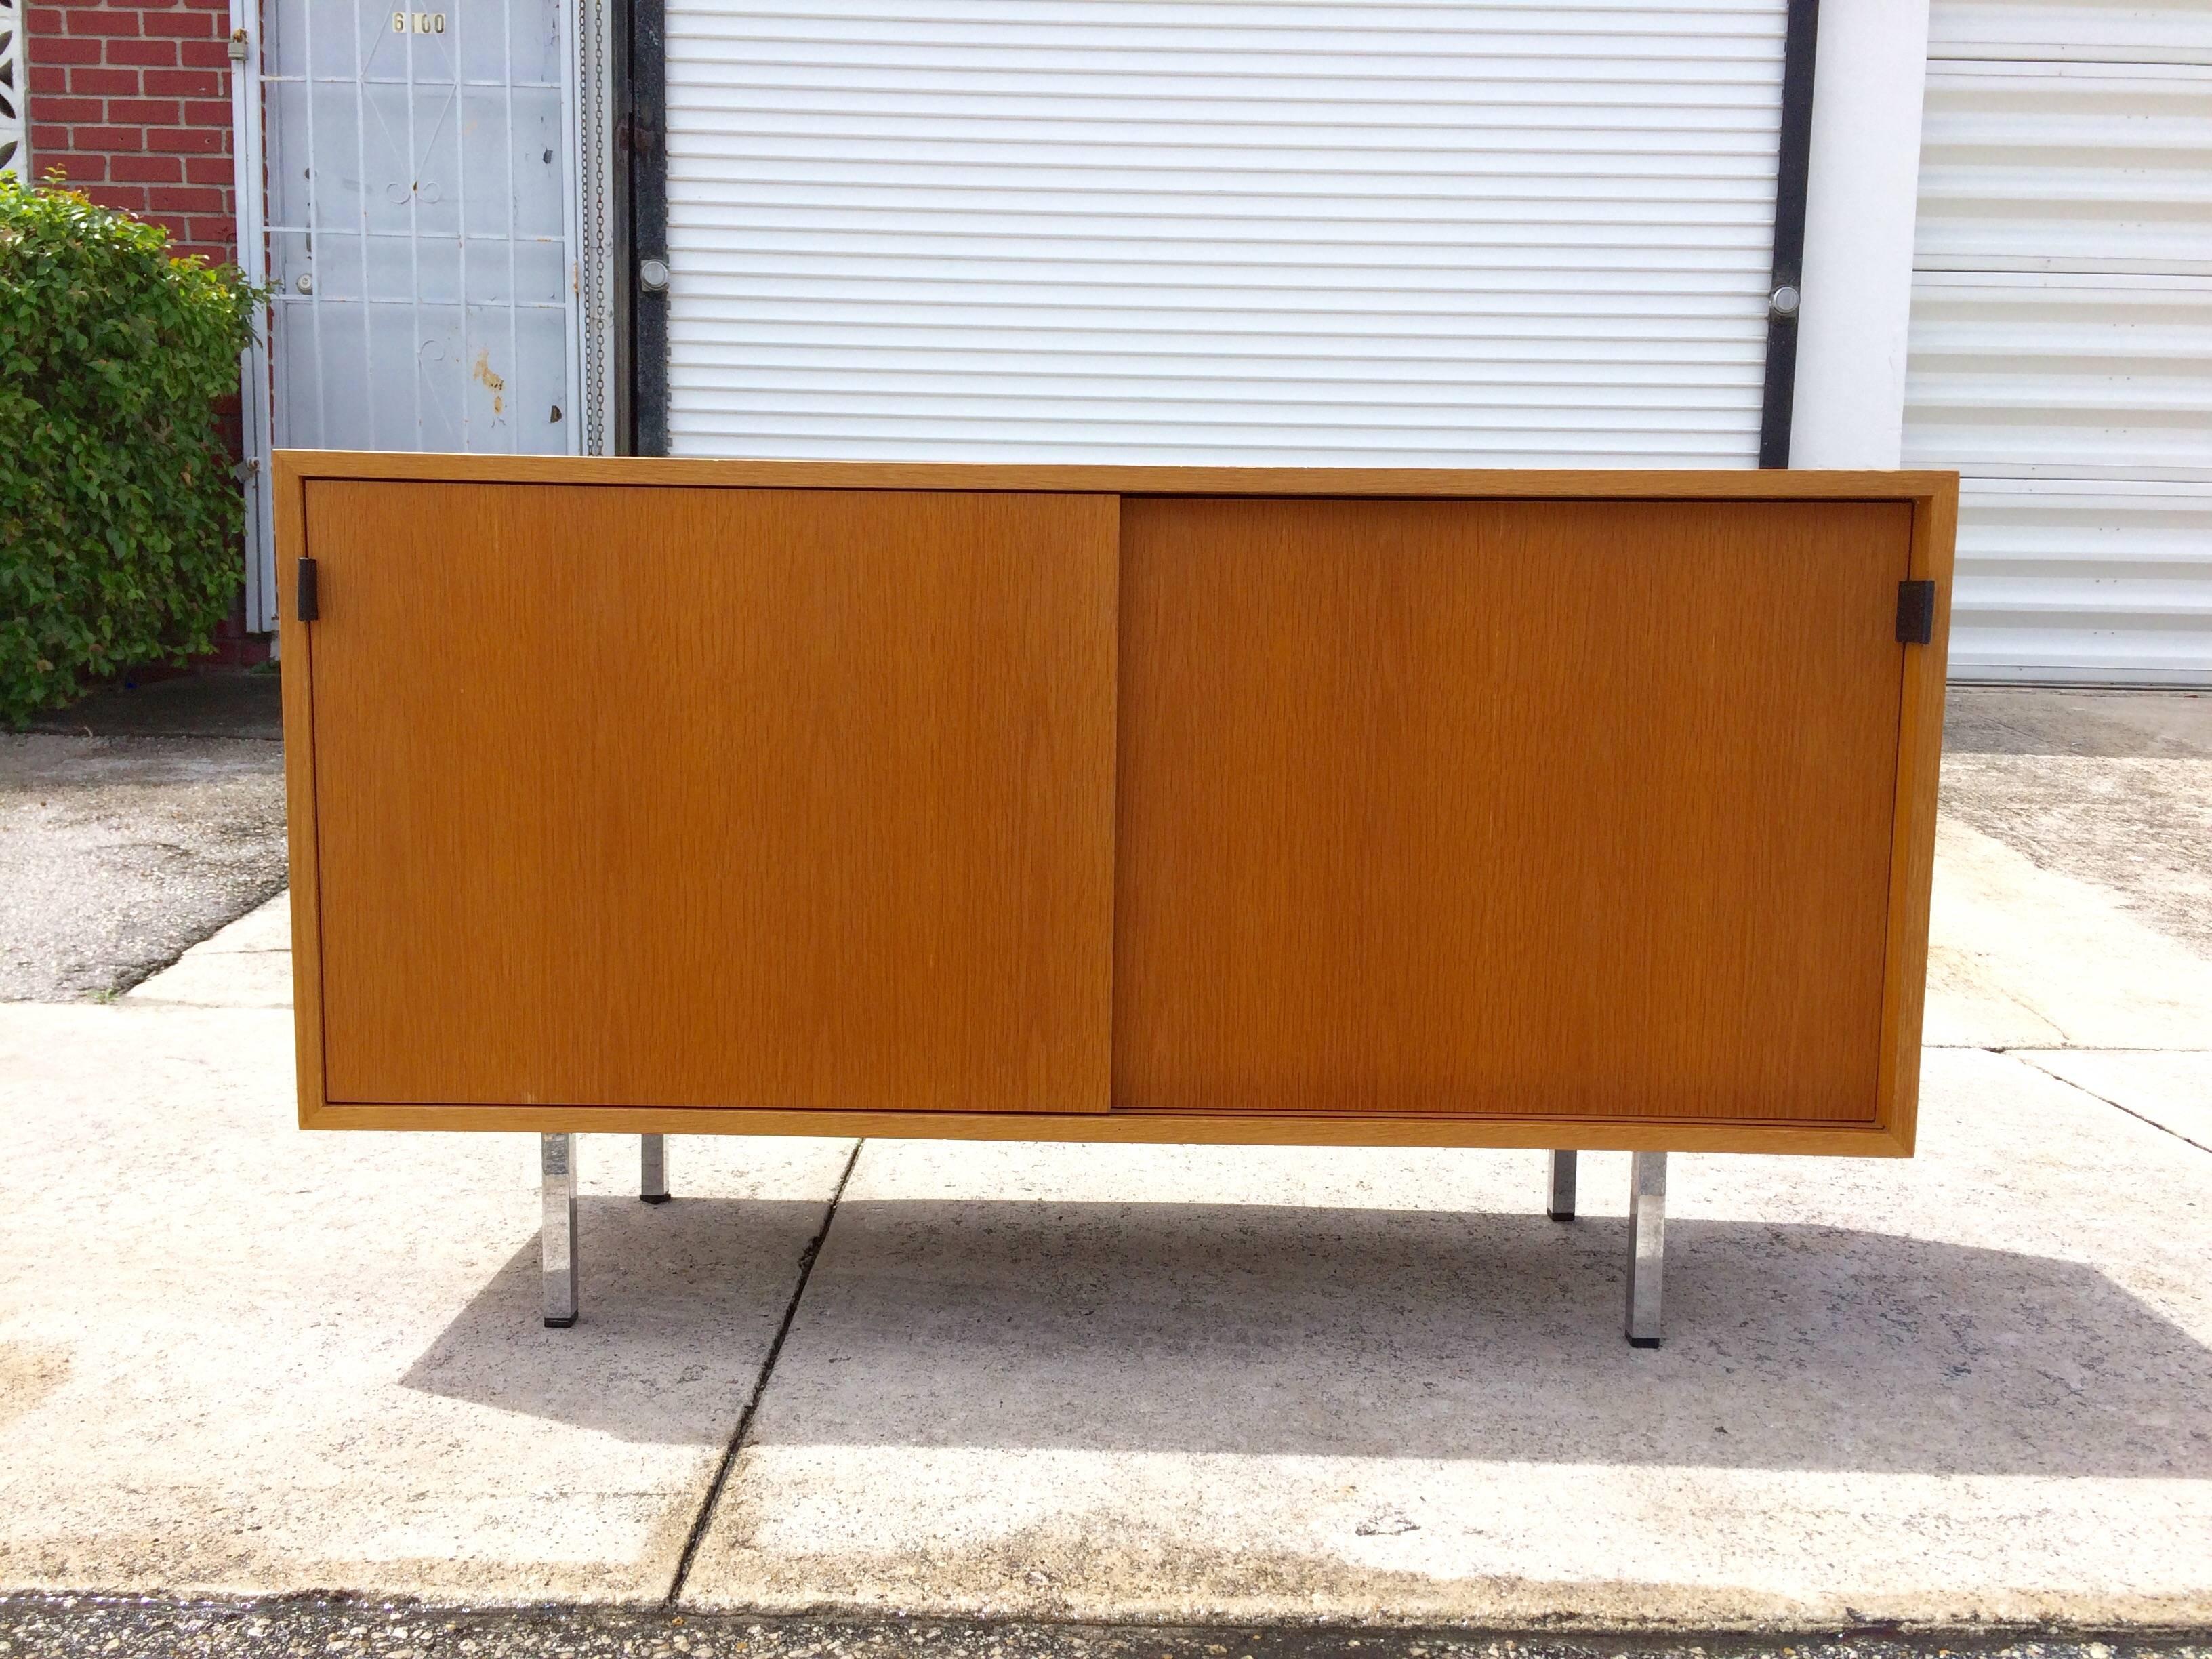 Credenza on four chrome legs, two sliding doors with black leather pulls. Behind the sliding doors are four shelves.